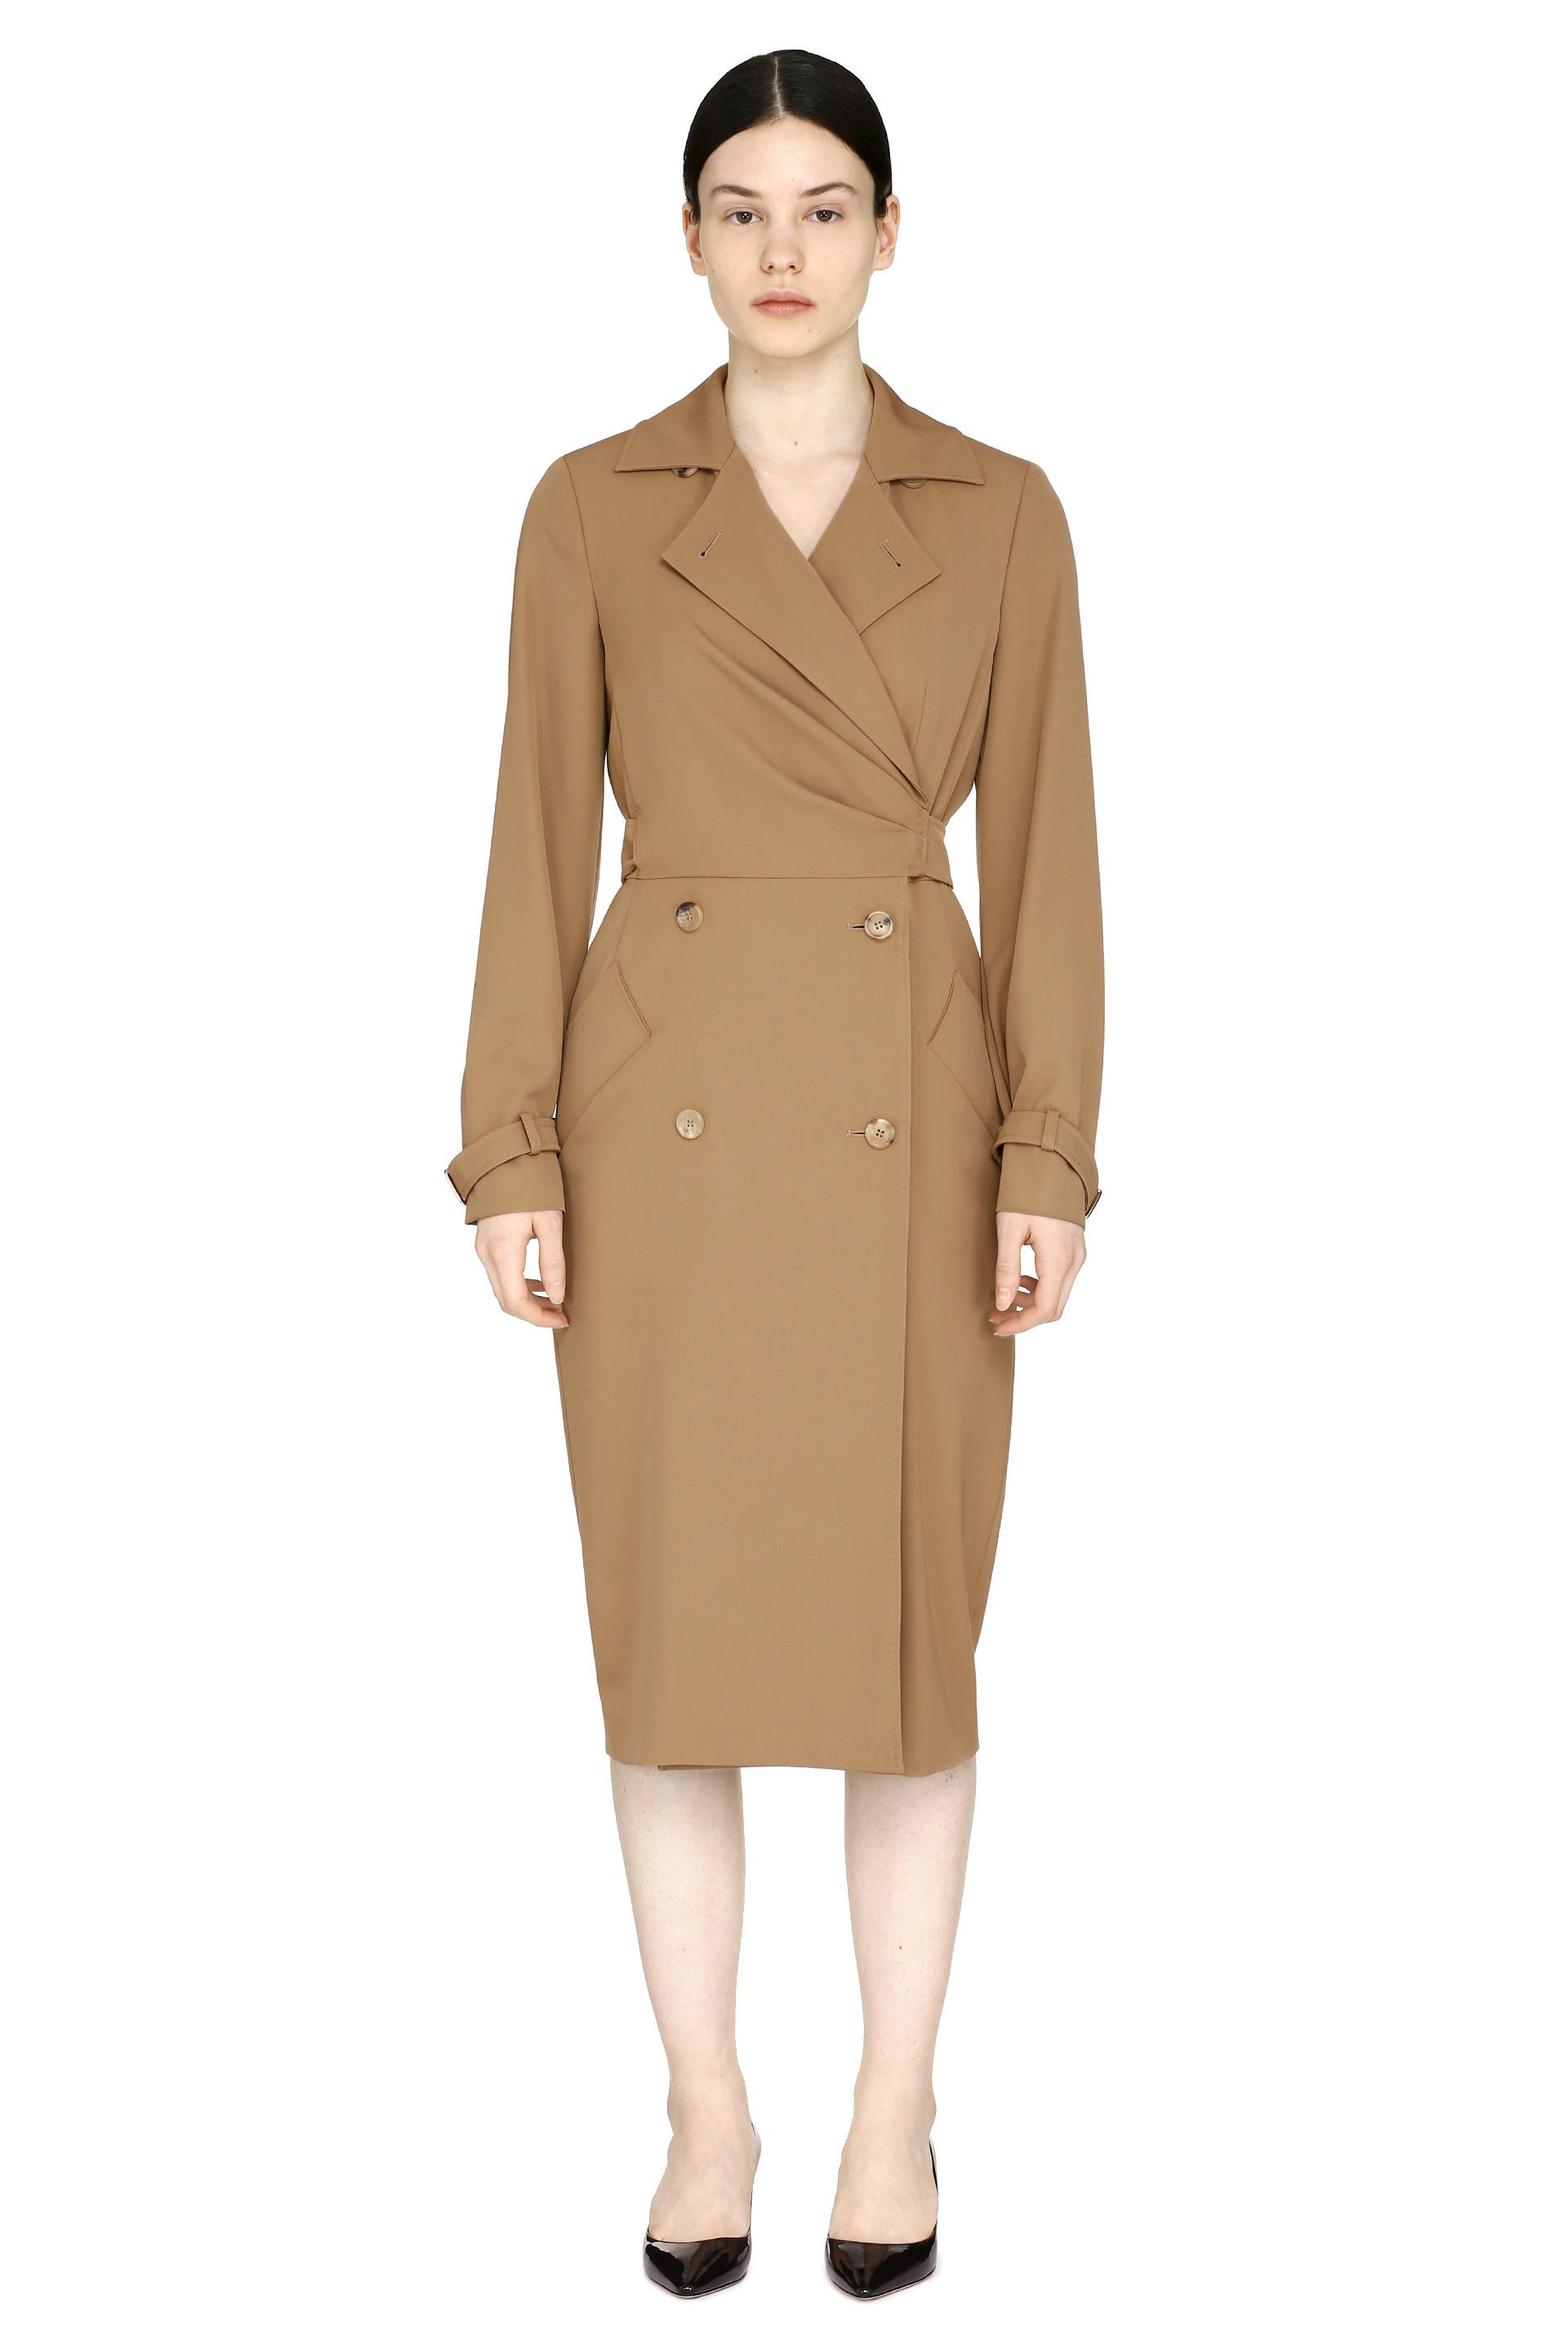 Max Mara Lucia Virgin Wool Double-breasted Dress in Camel (Natural) - Lyst